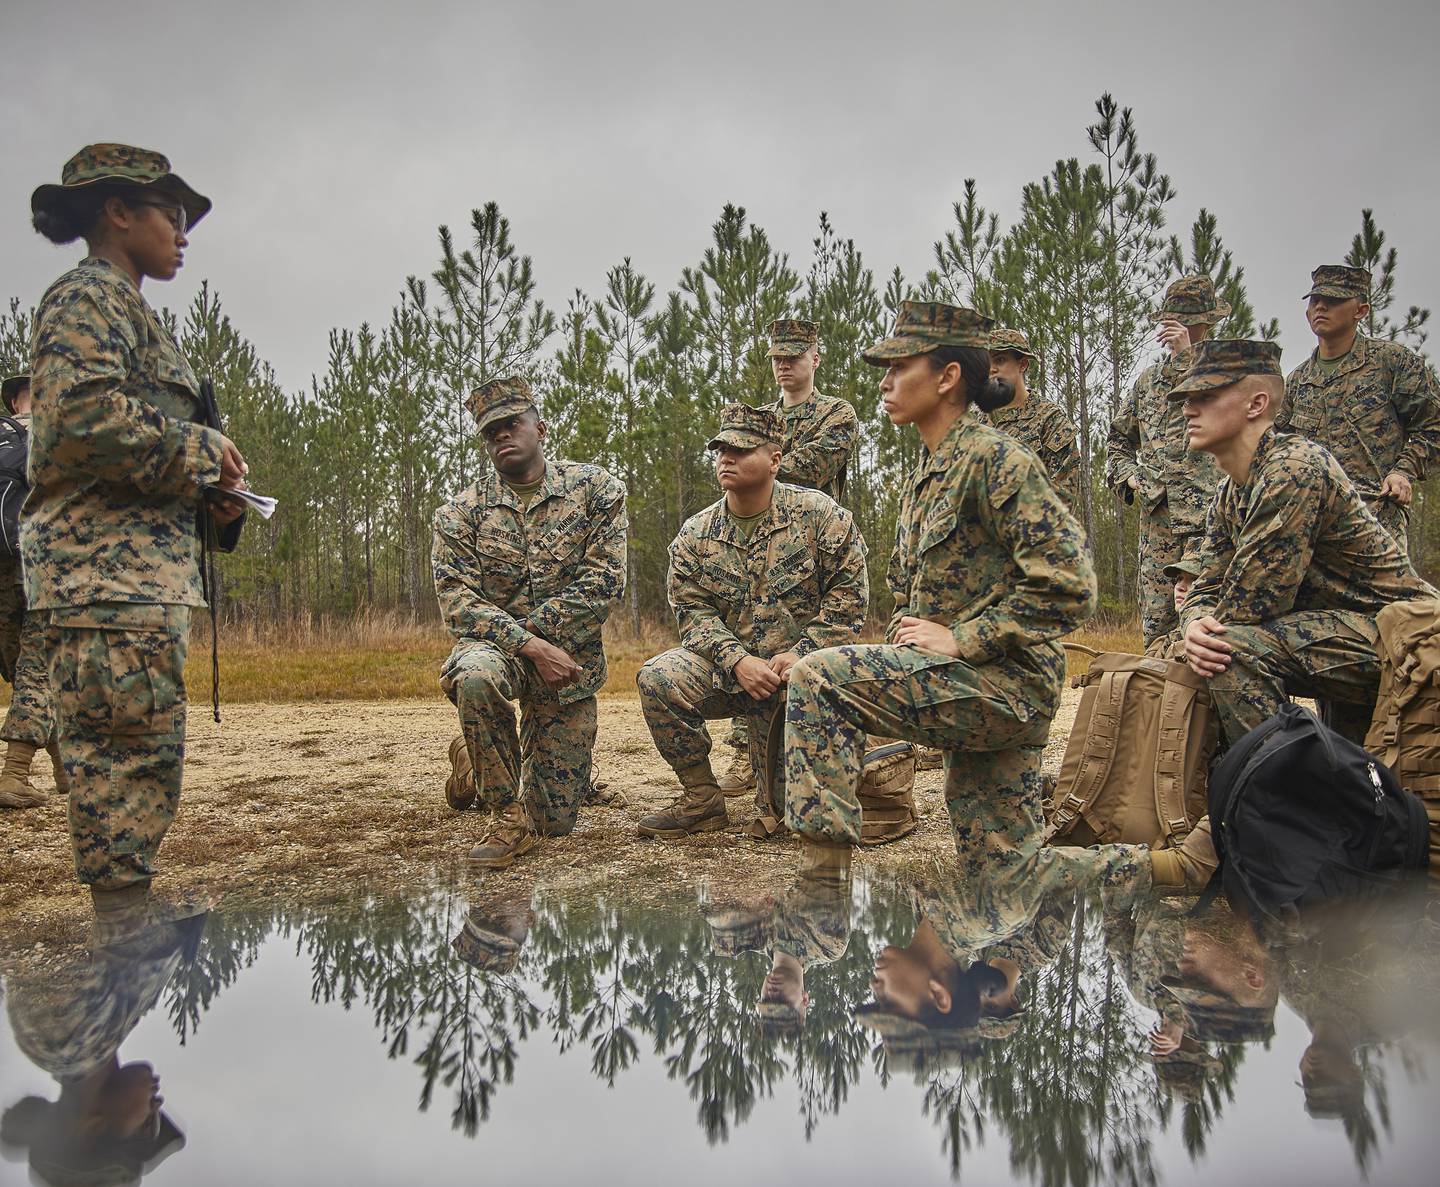 Marines with Marine Corps Support Facility New Orleans watch a resiliency training video between events during a field exercise at Camp Villere, Slidell, Louisiana, March 12, 2020.